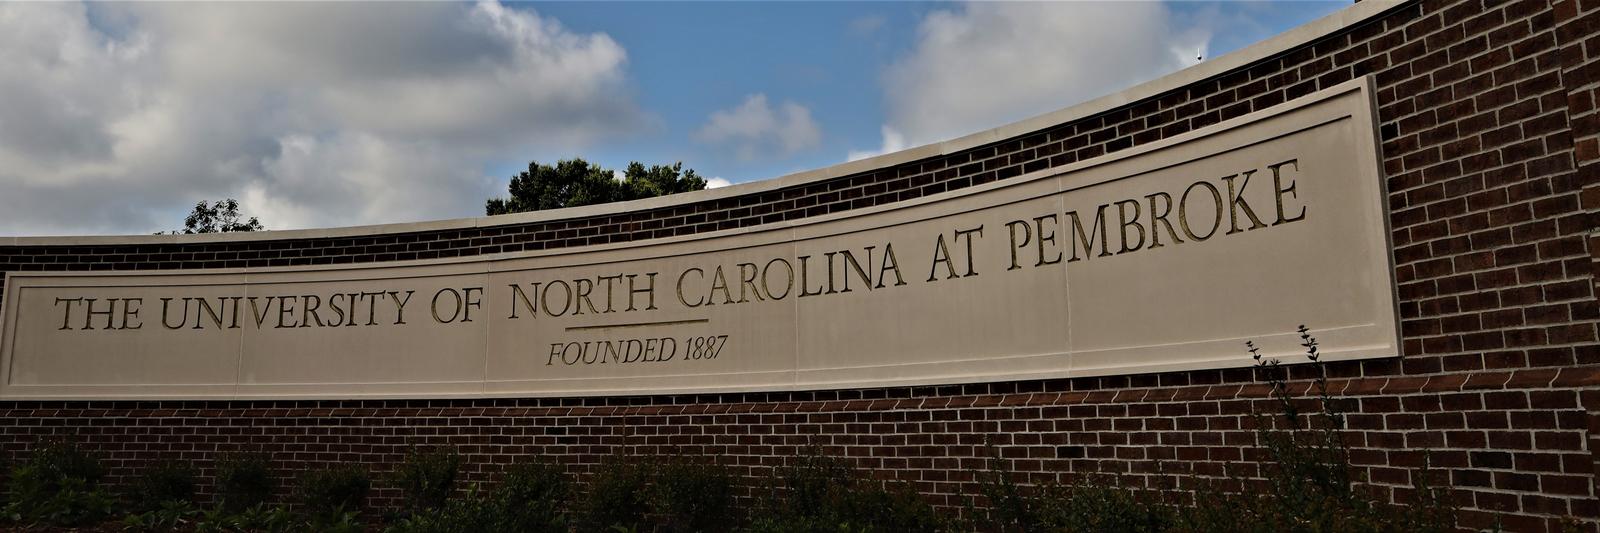 Office of Online Learning The University of North Carolina at Pembroke